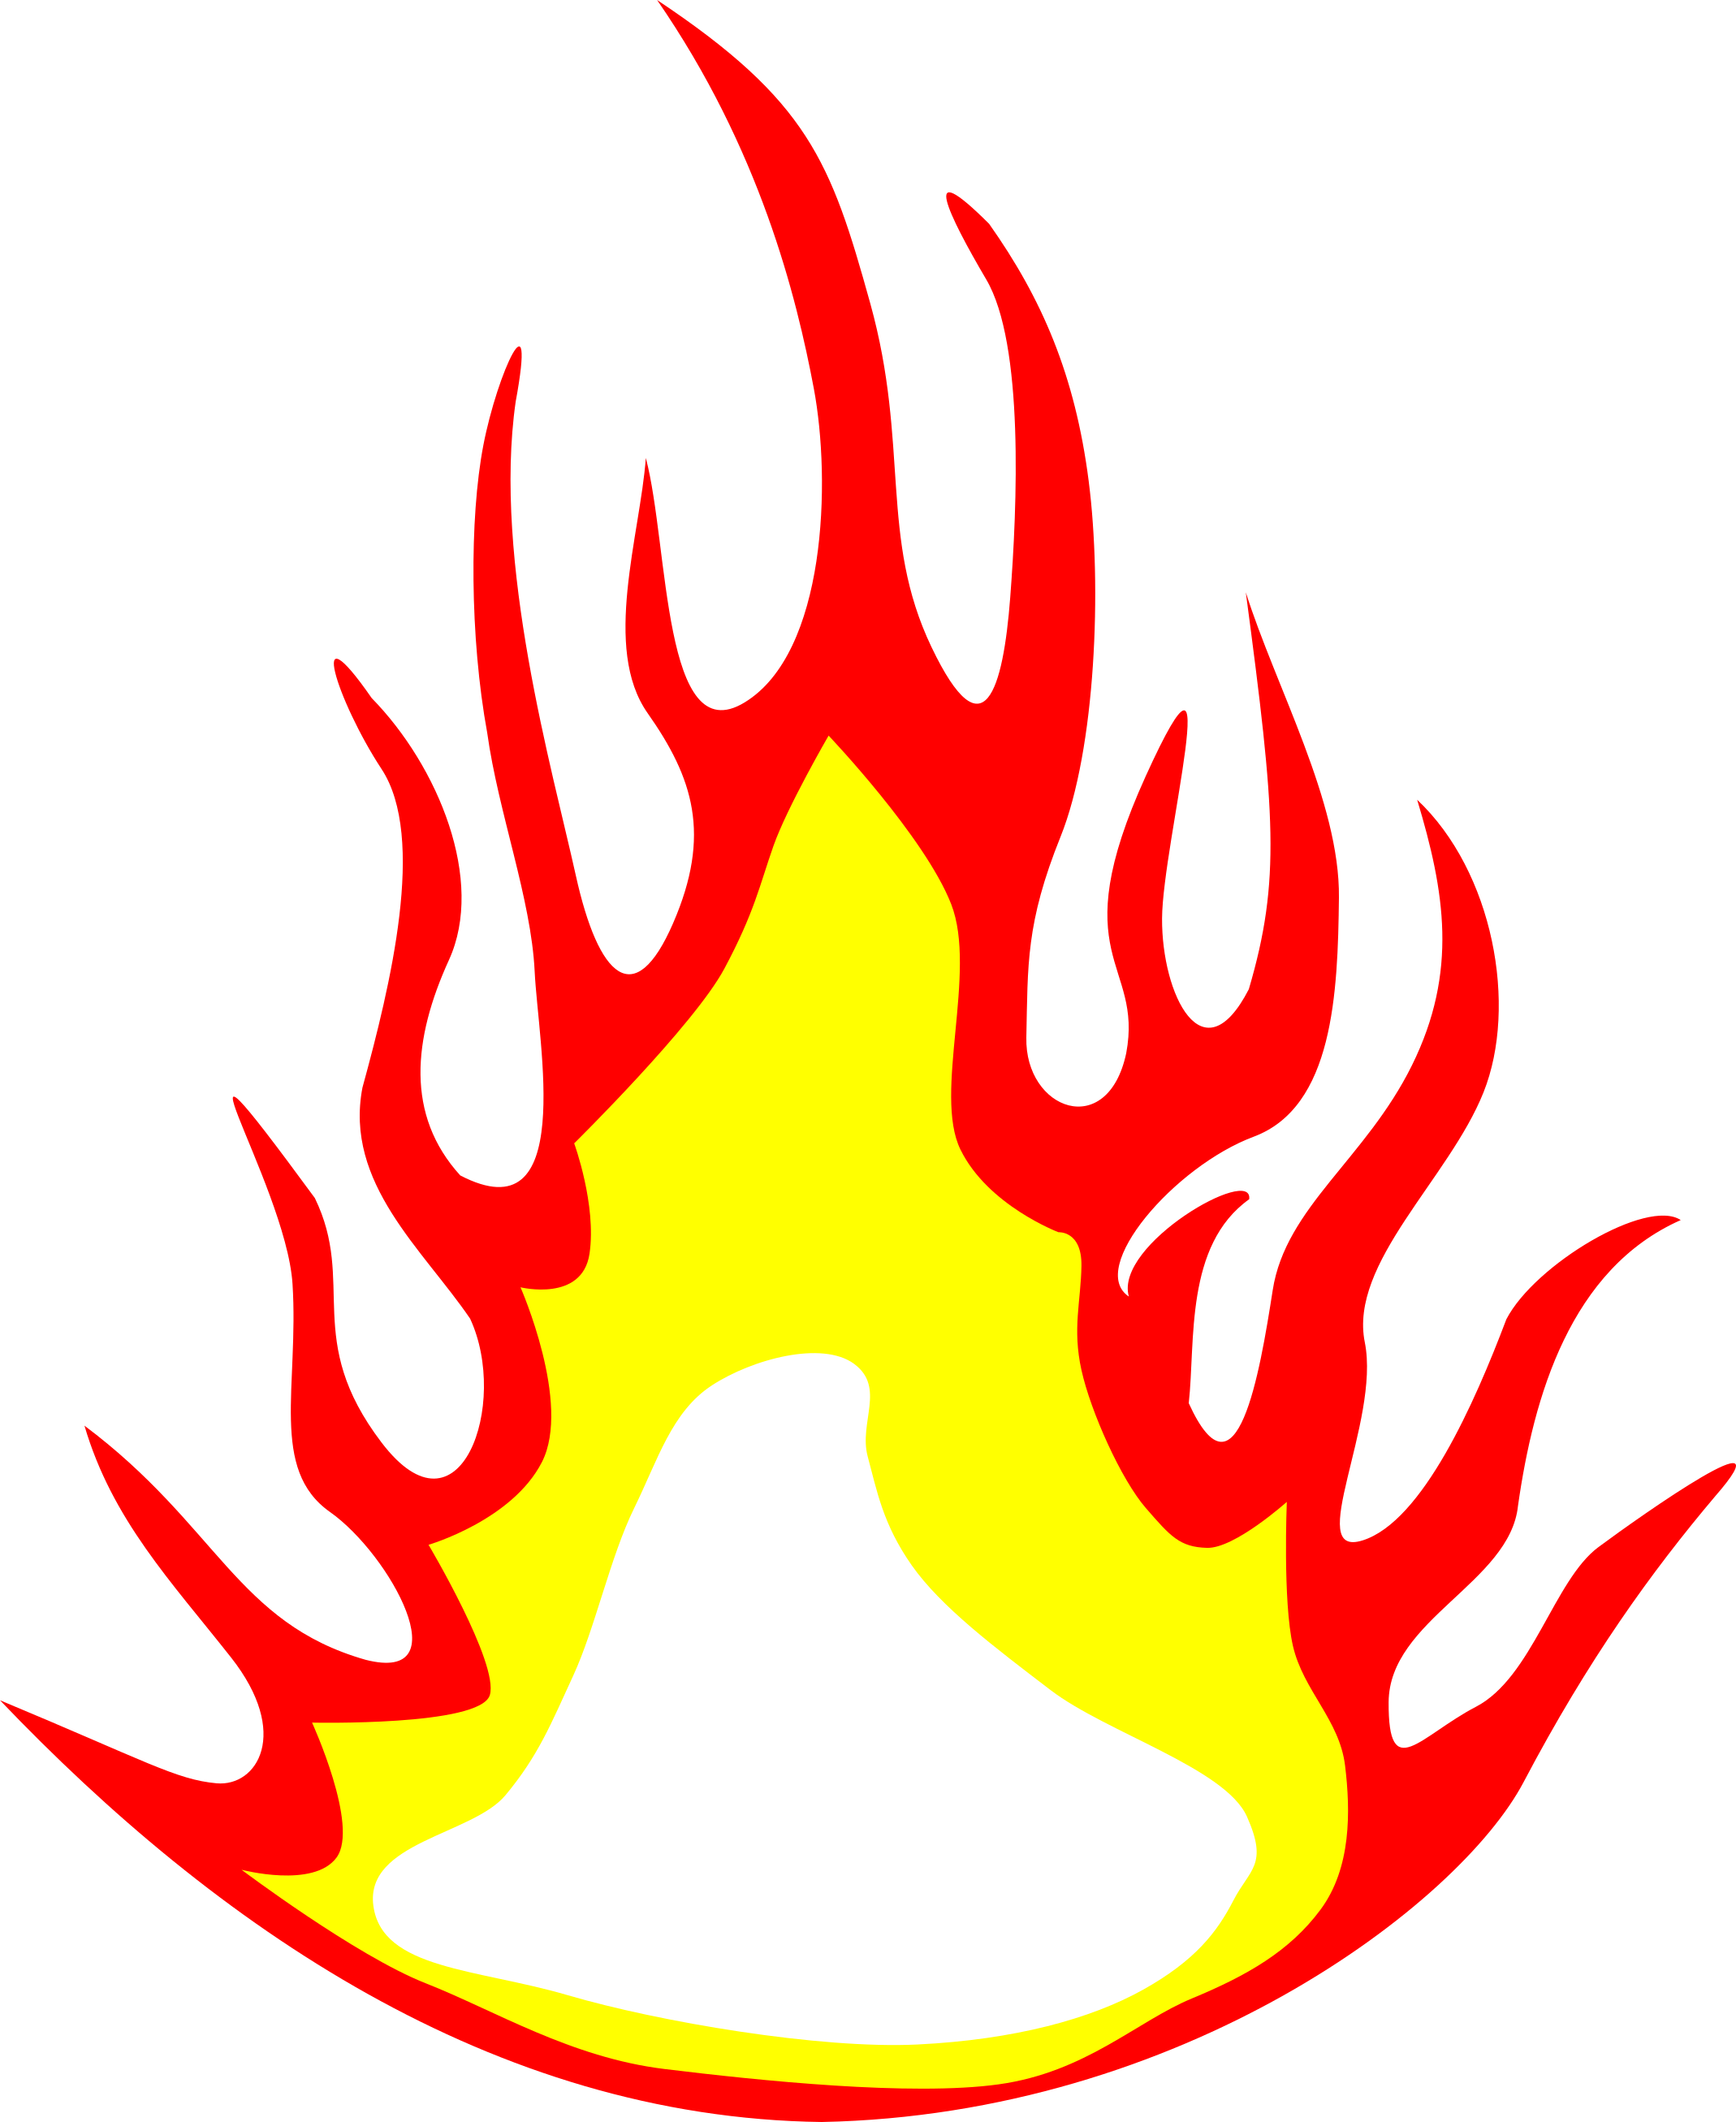 5 Fire Flame Clipart (PNG Transparent).